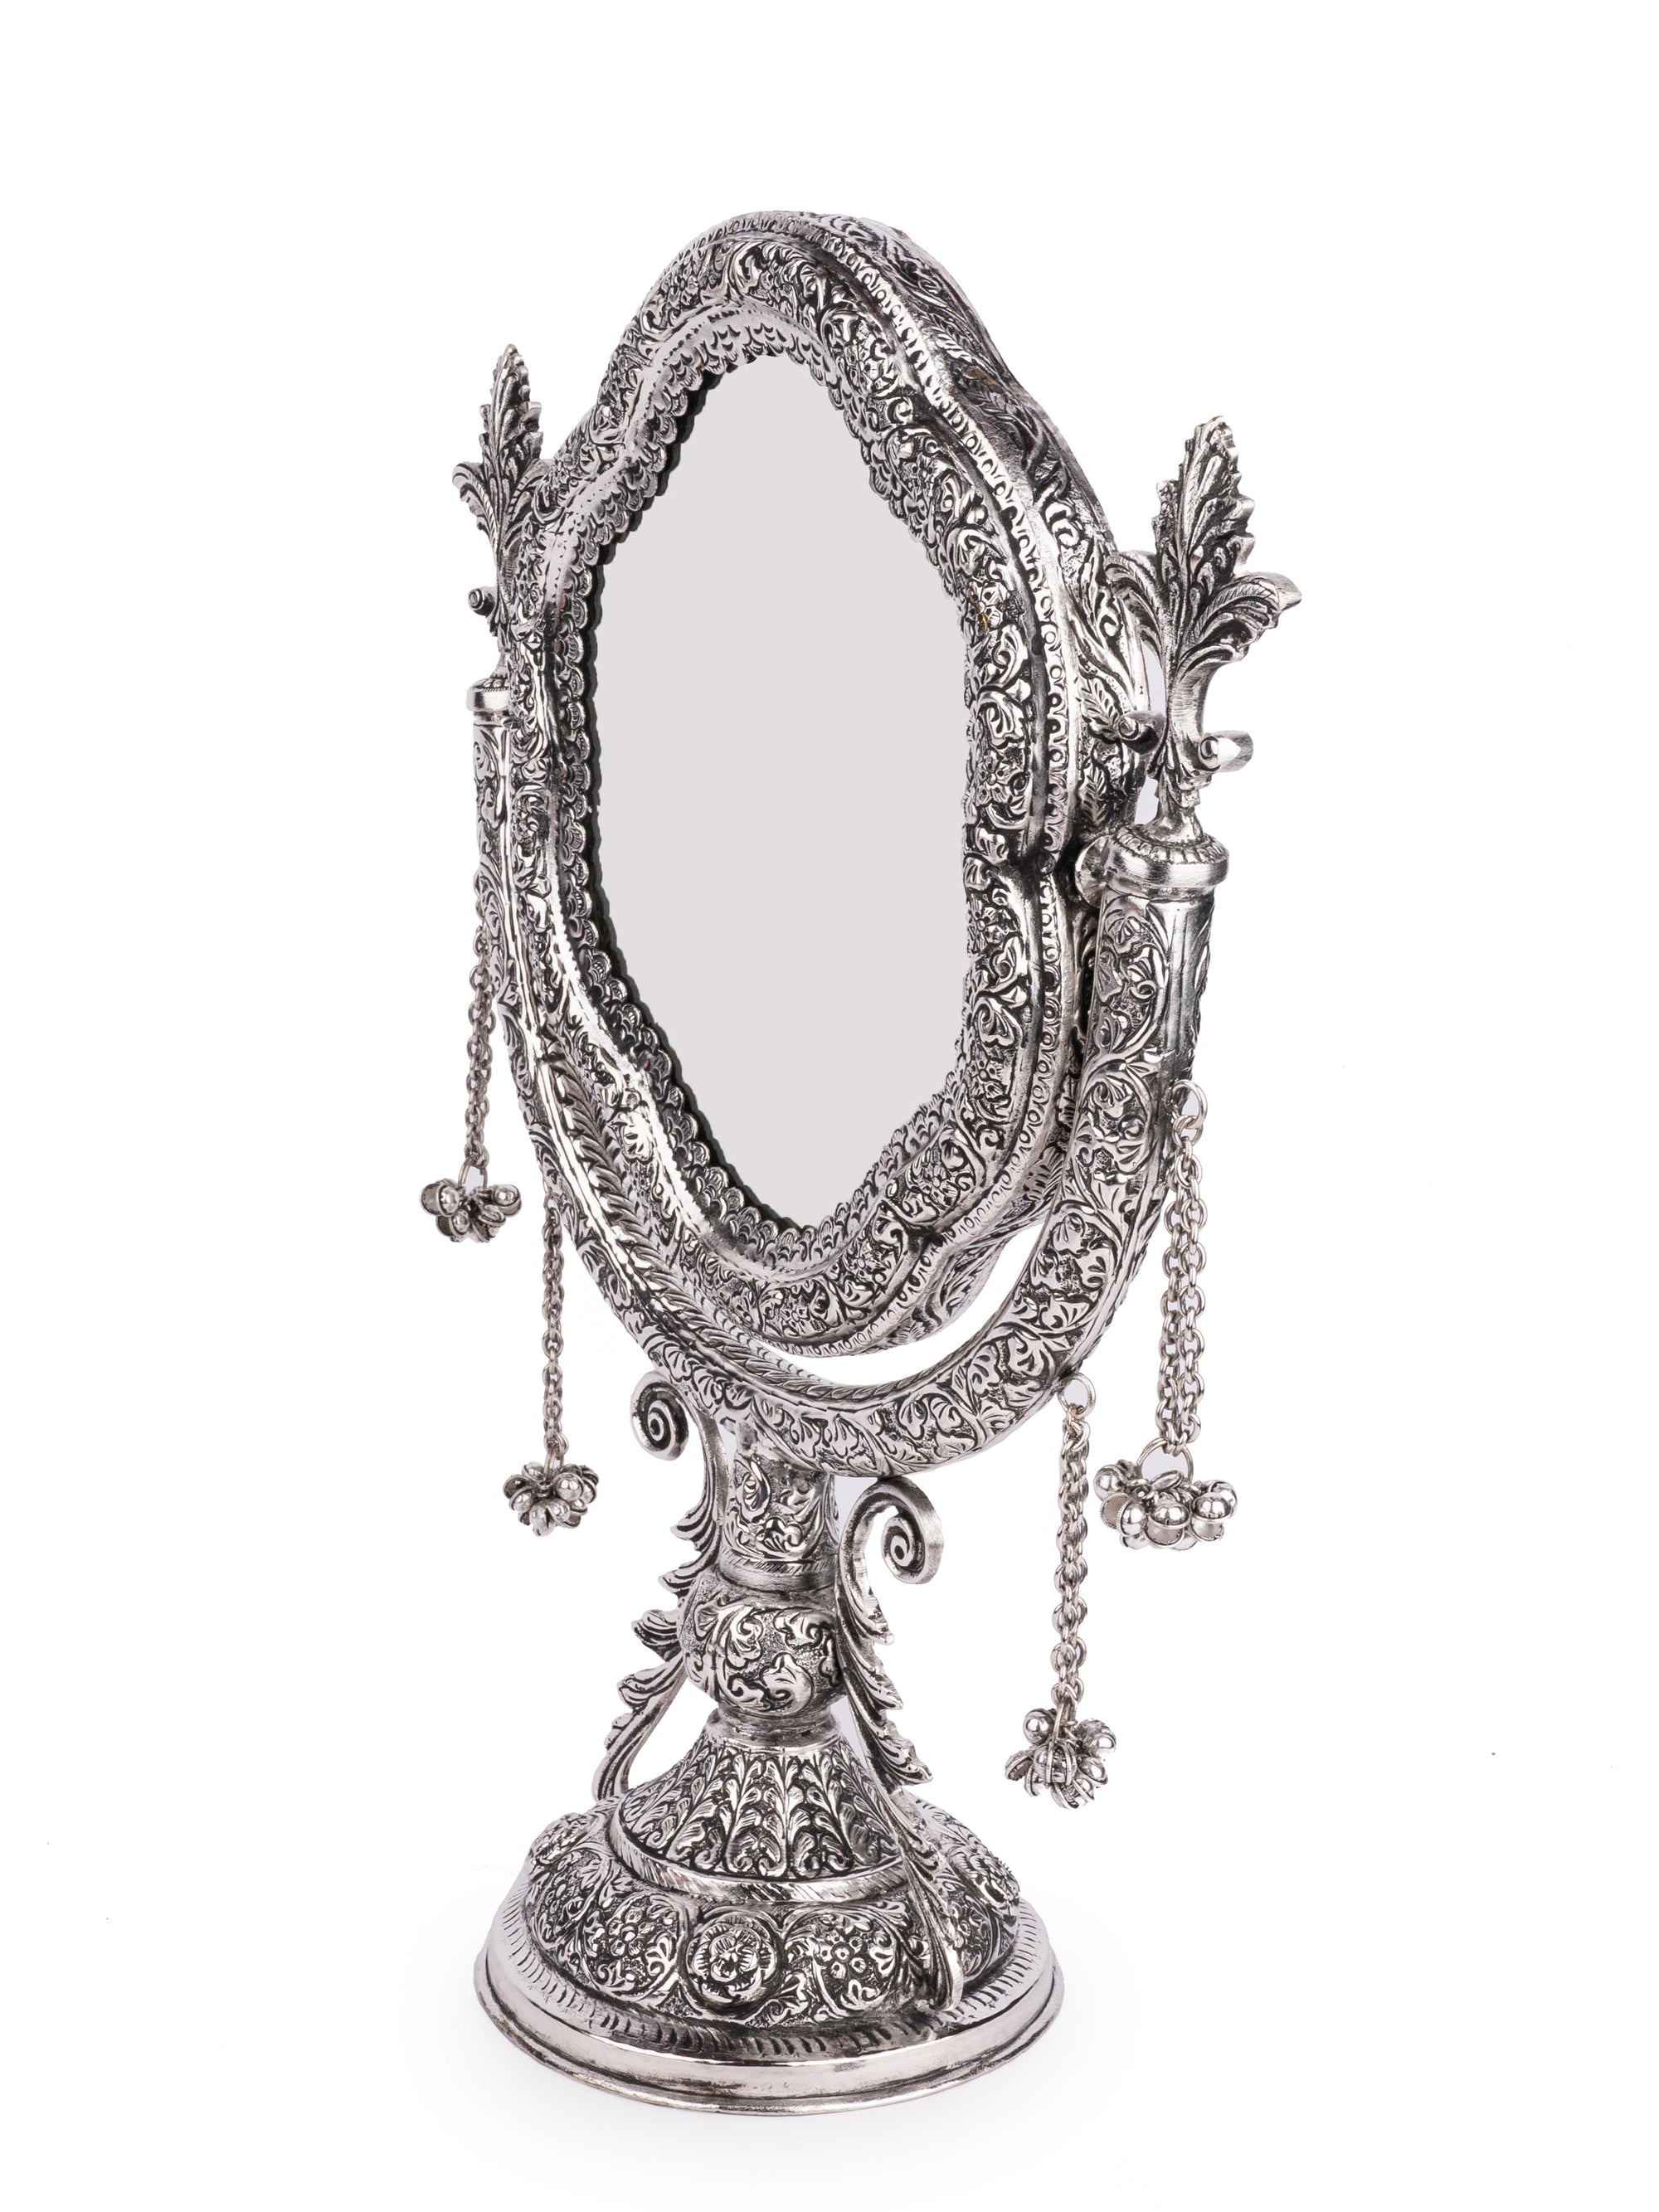 Metal Crafted Classic Design Vanity Mirror with Antique Silver Finish - The Heritage Artifacts